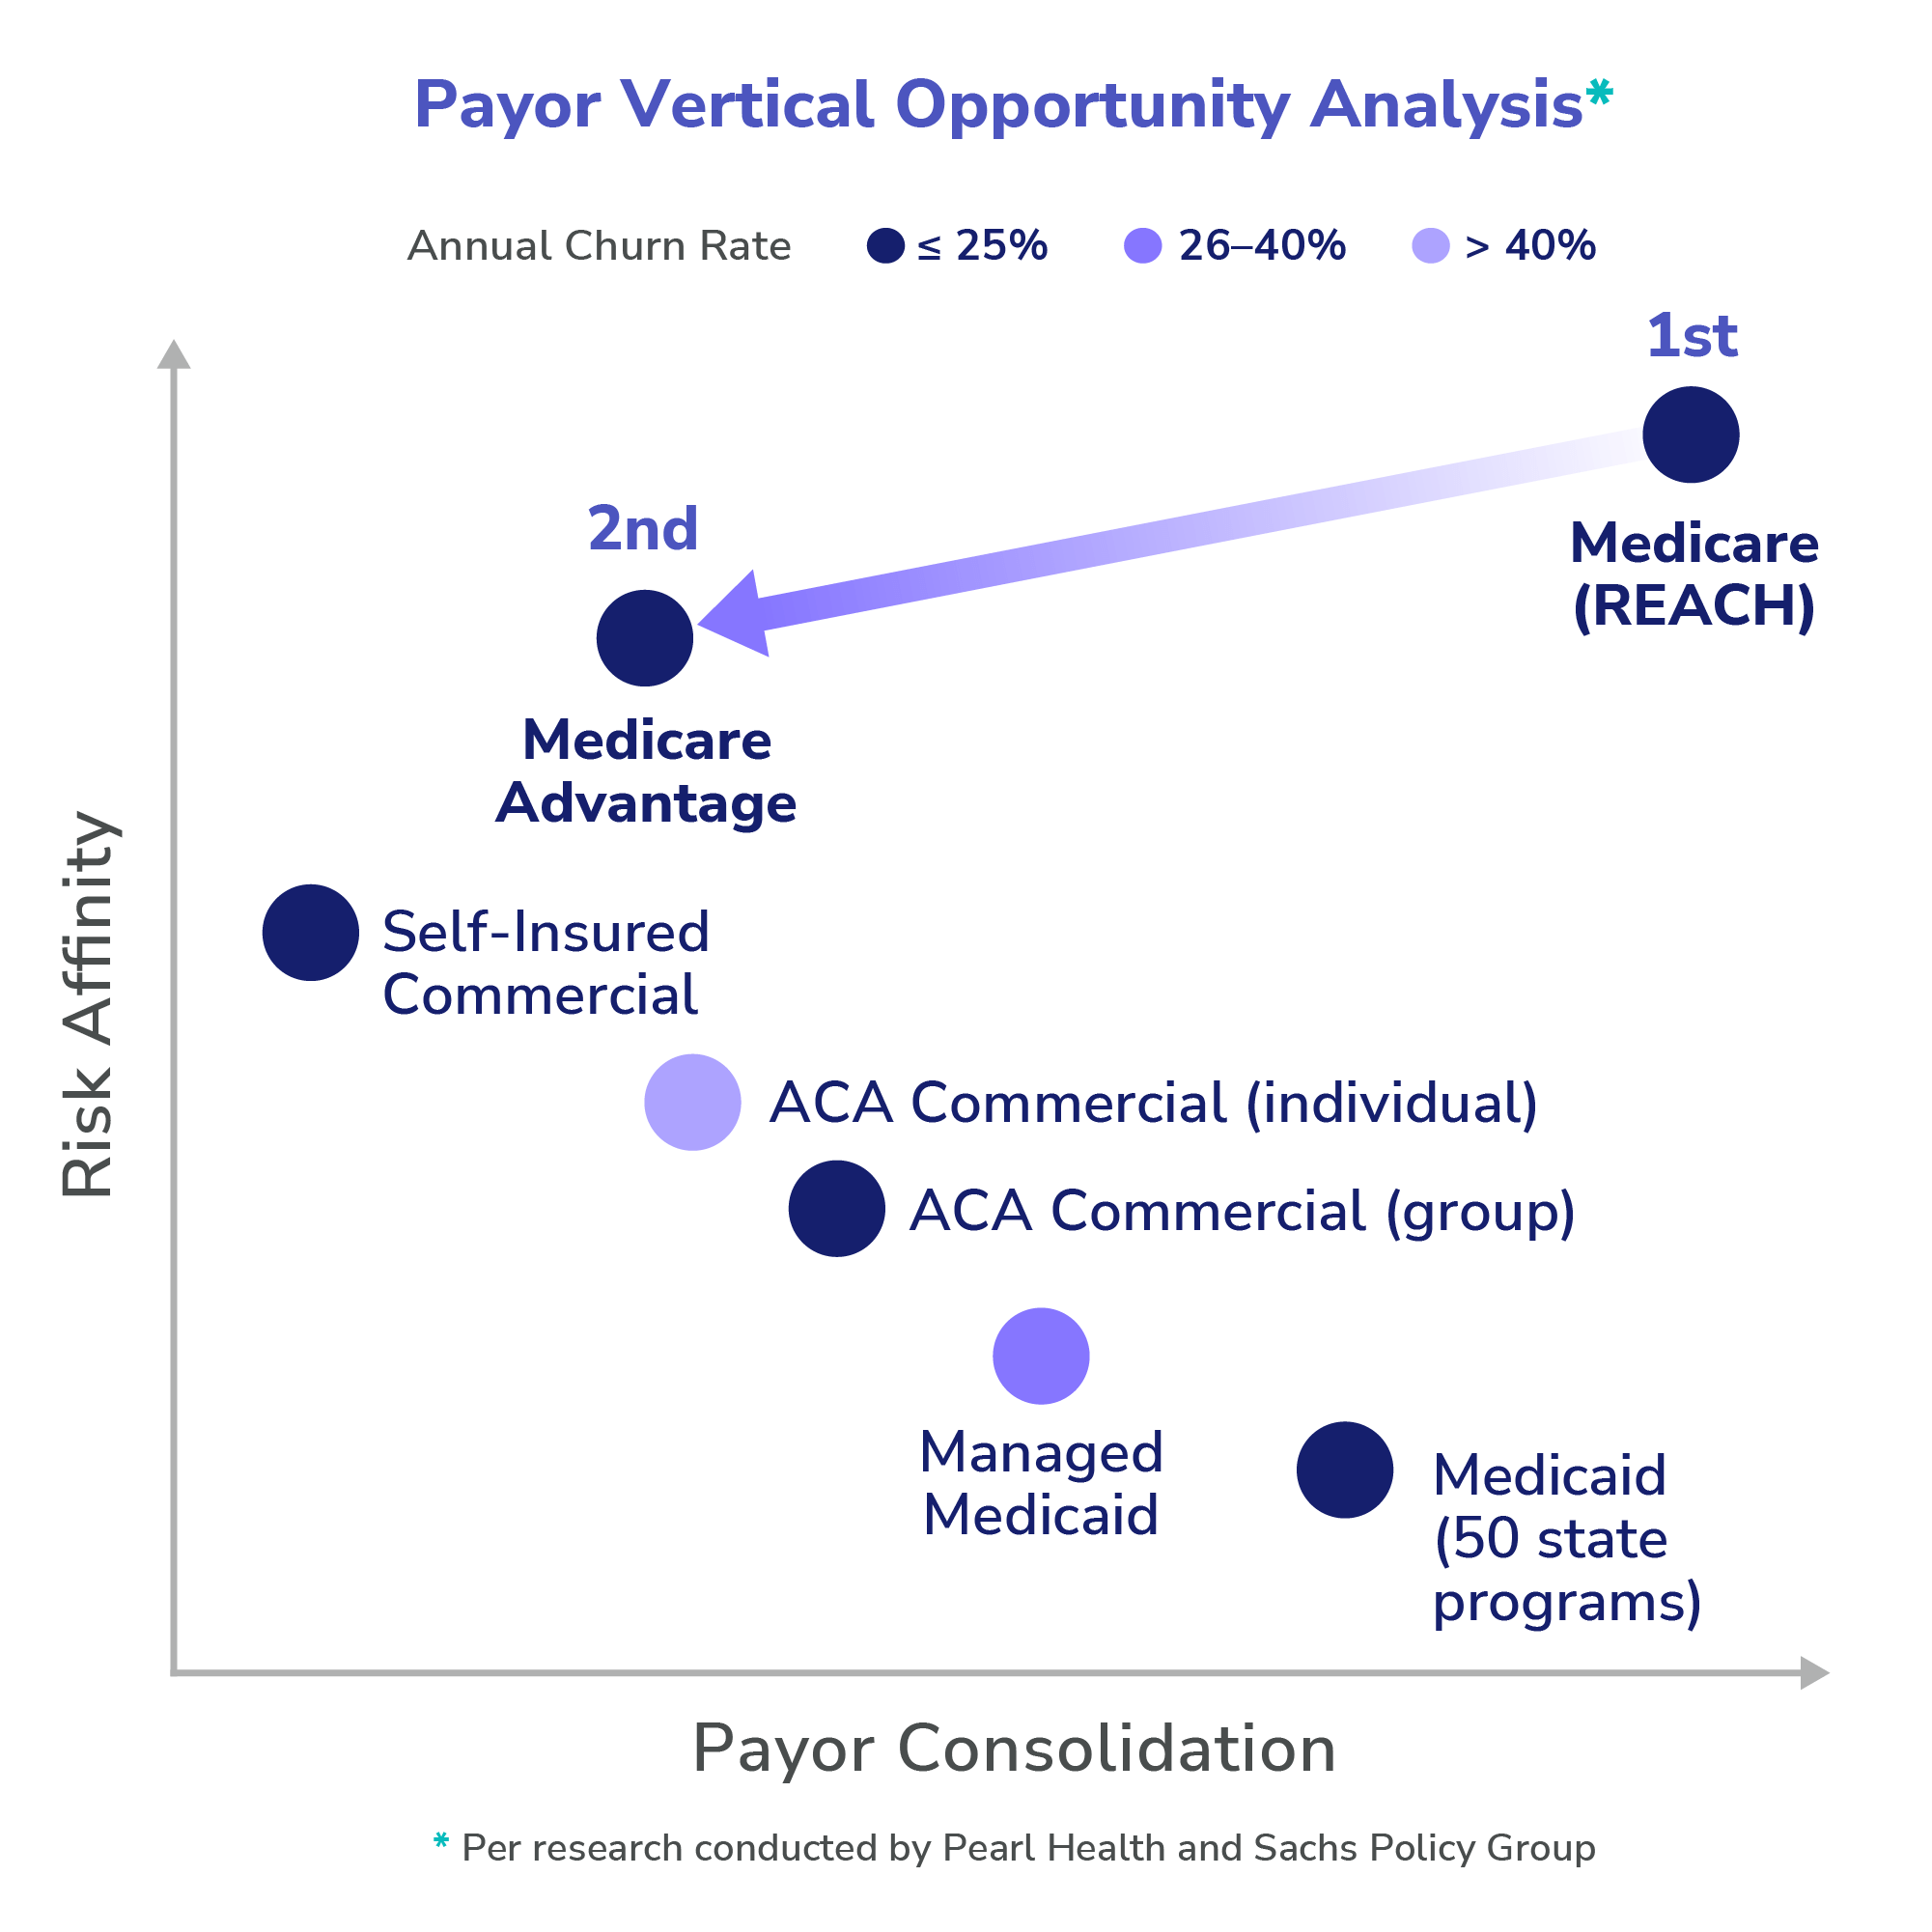 Payor Vertical Opportunity Analysis